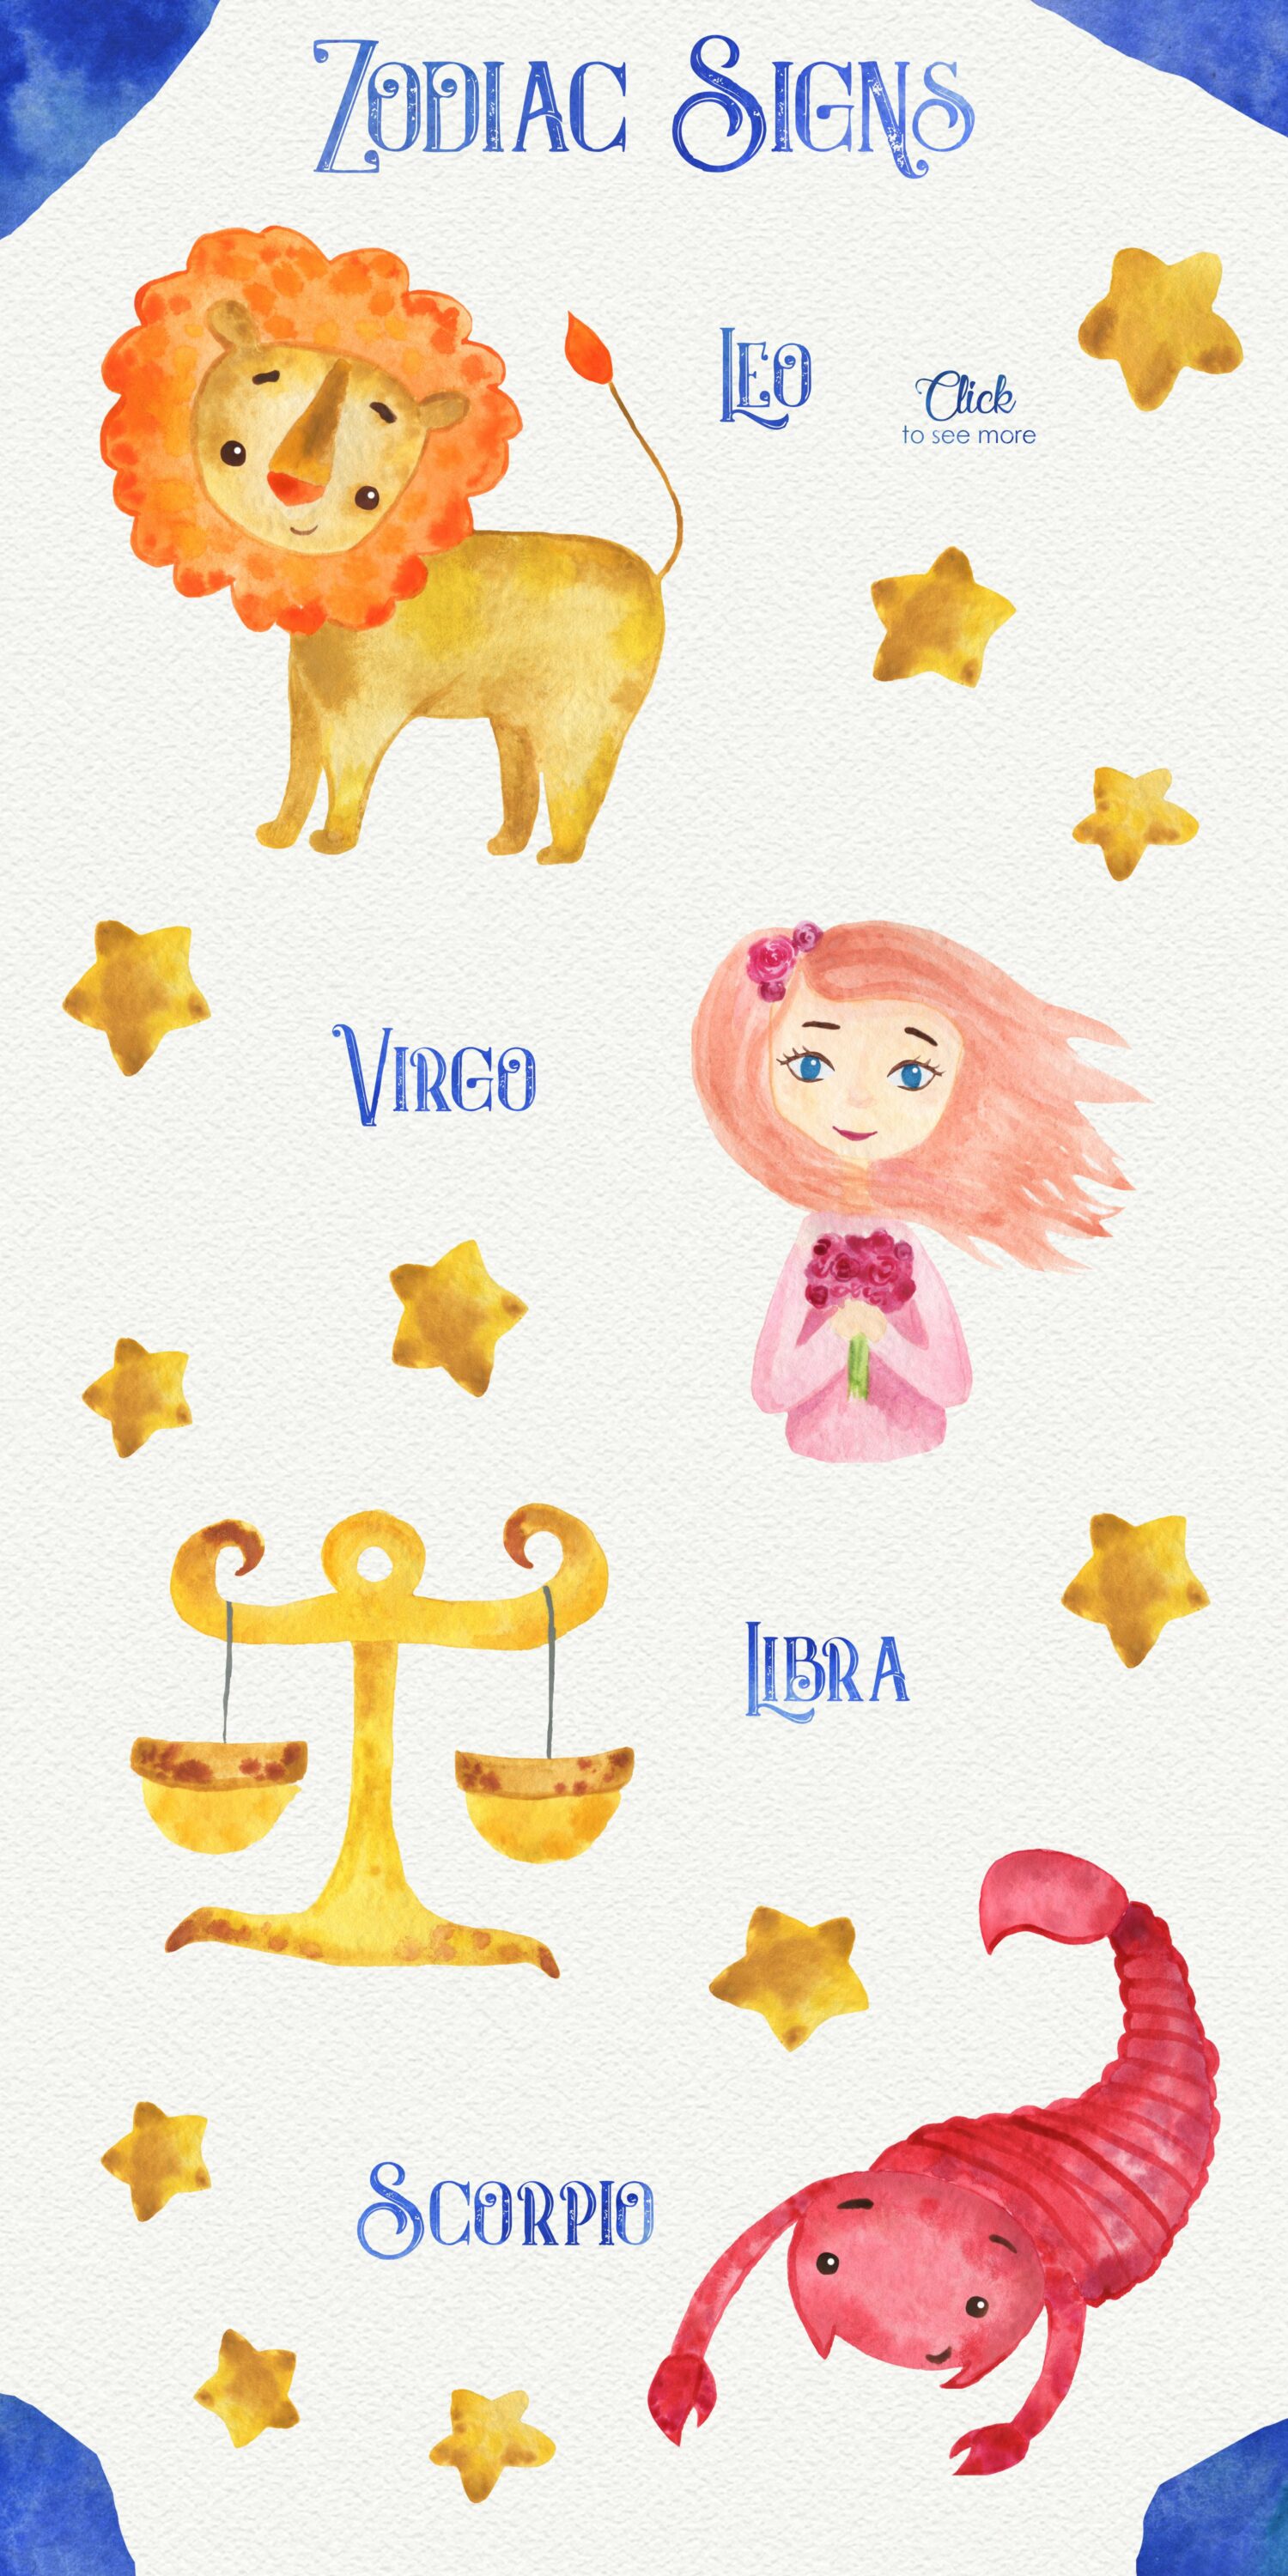 So high quality and bright zodiac signs.